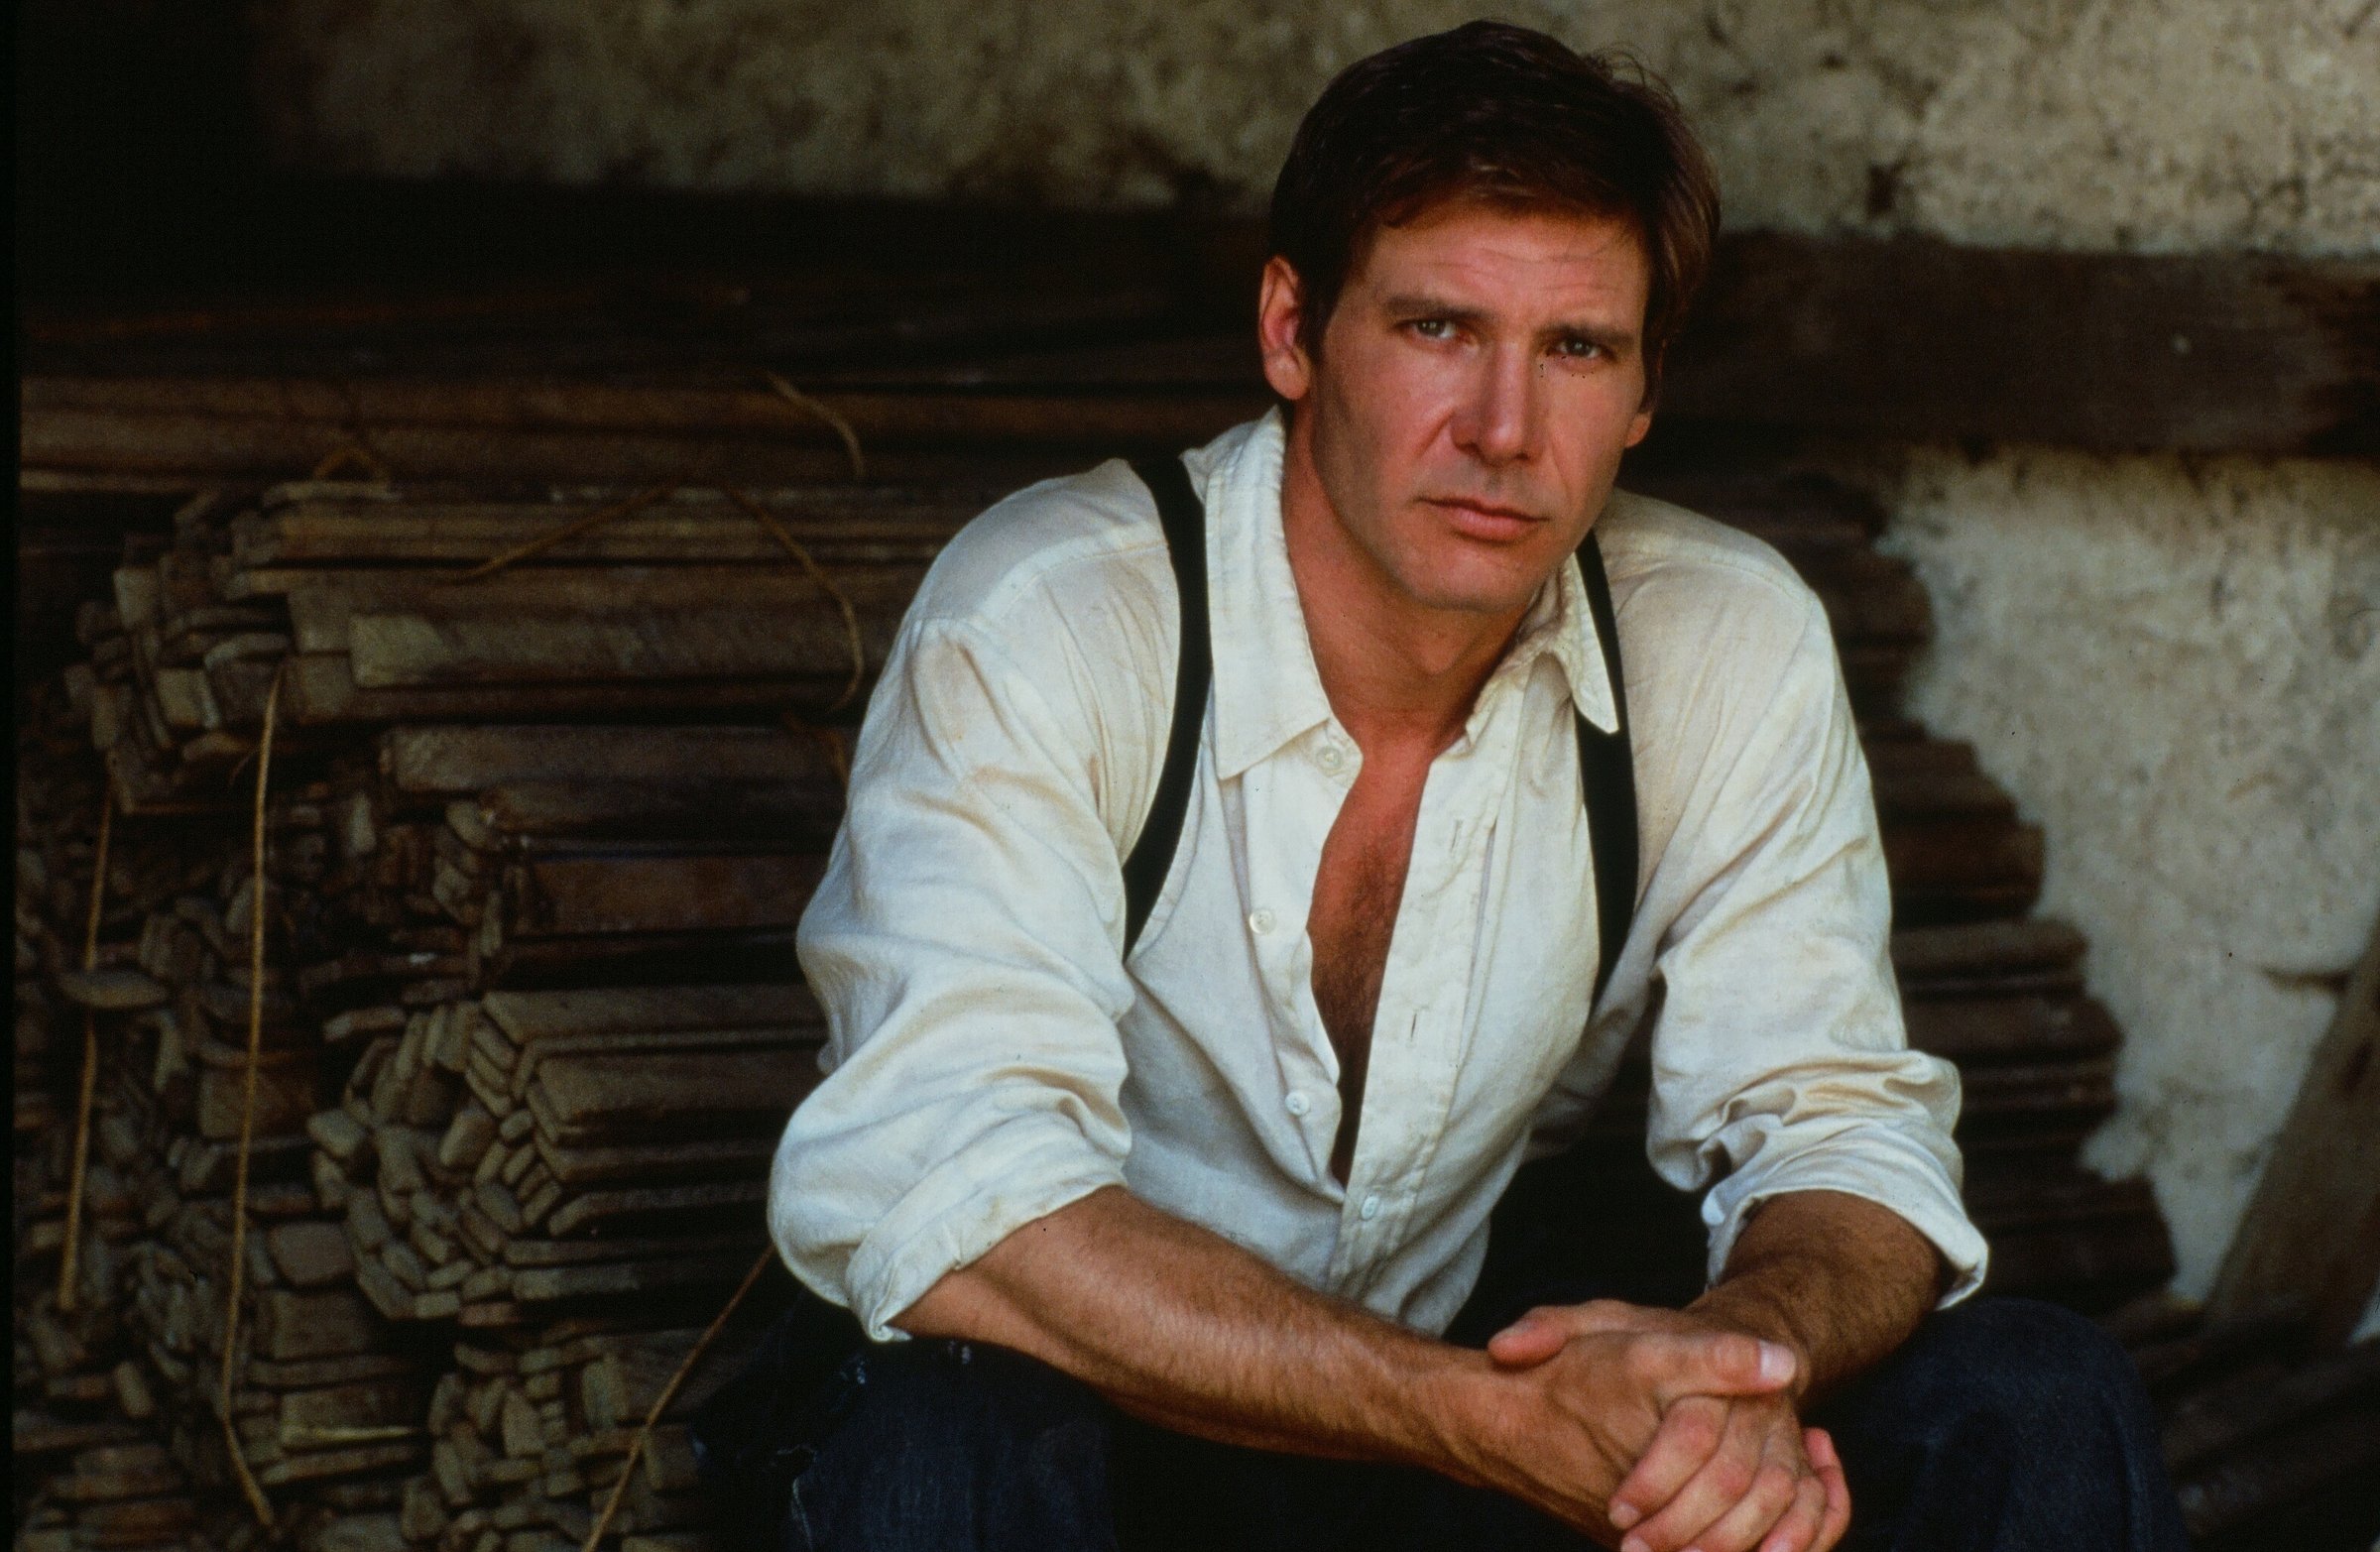 Harrison Ford poses for the Paramount Pictures movie "Witness" circa 1985.